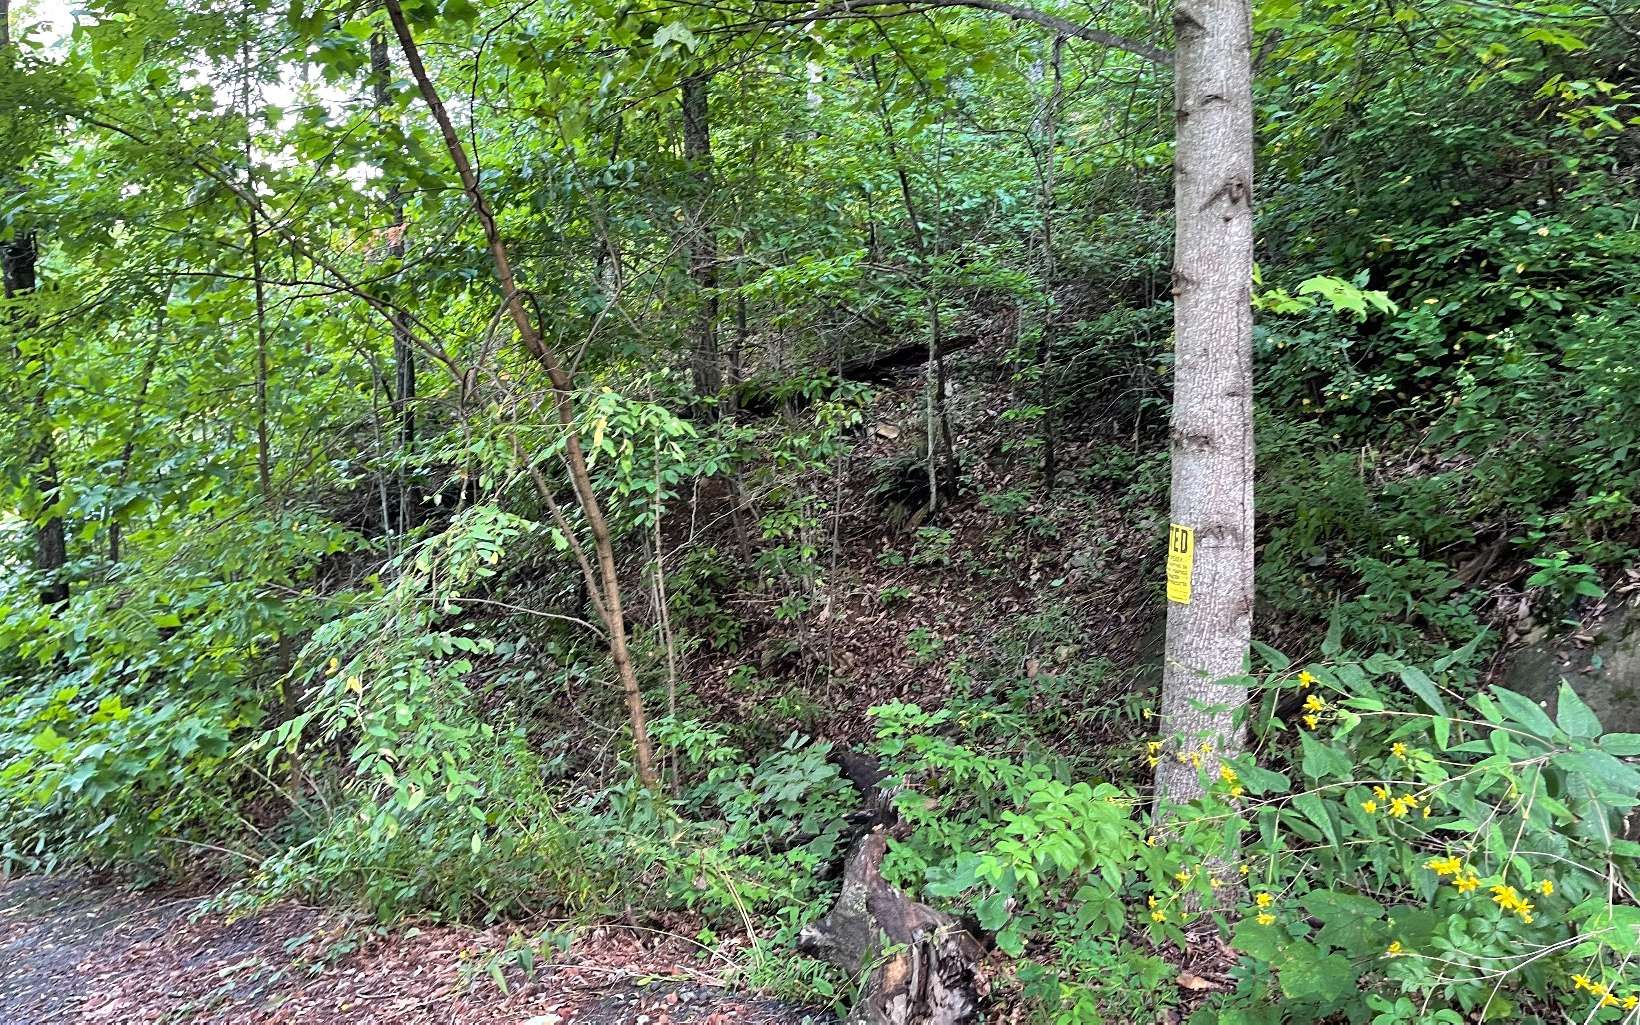 3.6 BEAUTIFULLY WOODED ACRES IN THE MOUNTAINS OF NORTH GEORGIA!! Located in a paved subdivision with large lots providing each owner private peace & quiet, this tract would be perfect for building a mountain getaway. Mountain and lake views with clearing.